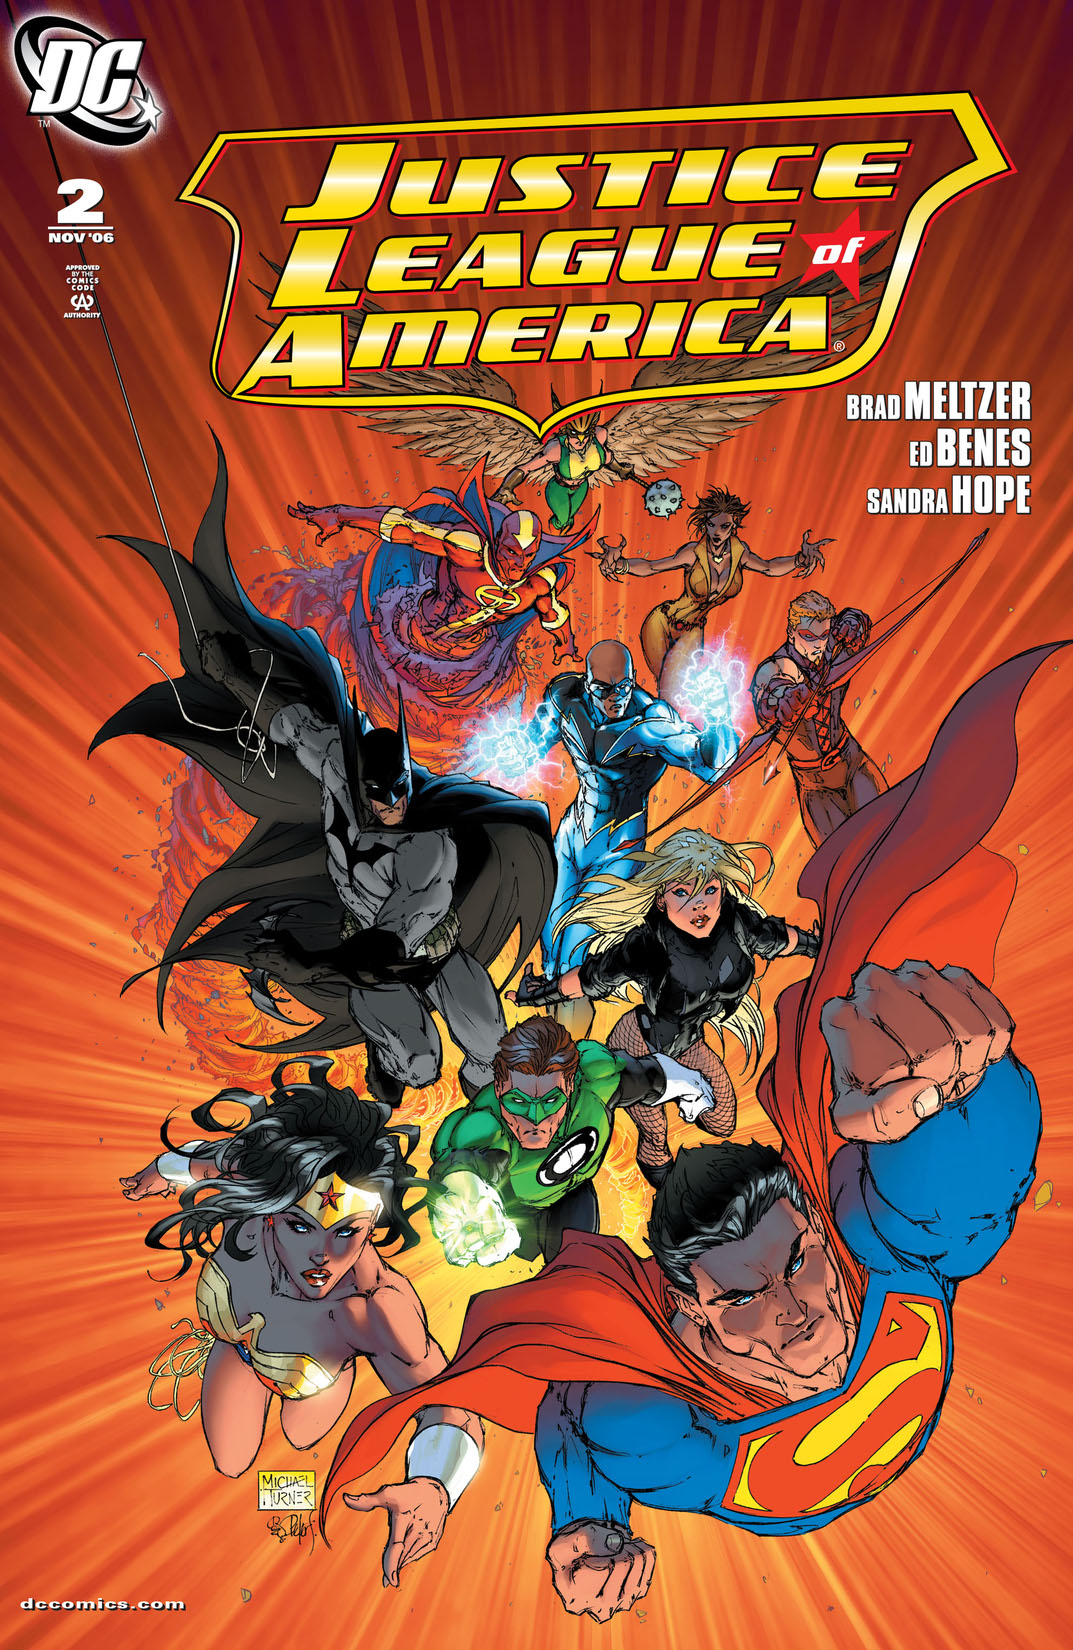 Justice League of America (2006-) #2 preview images